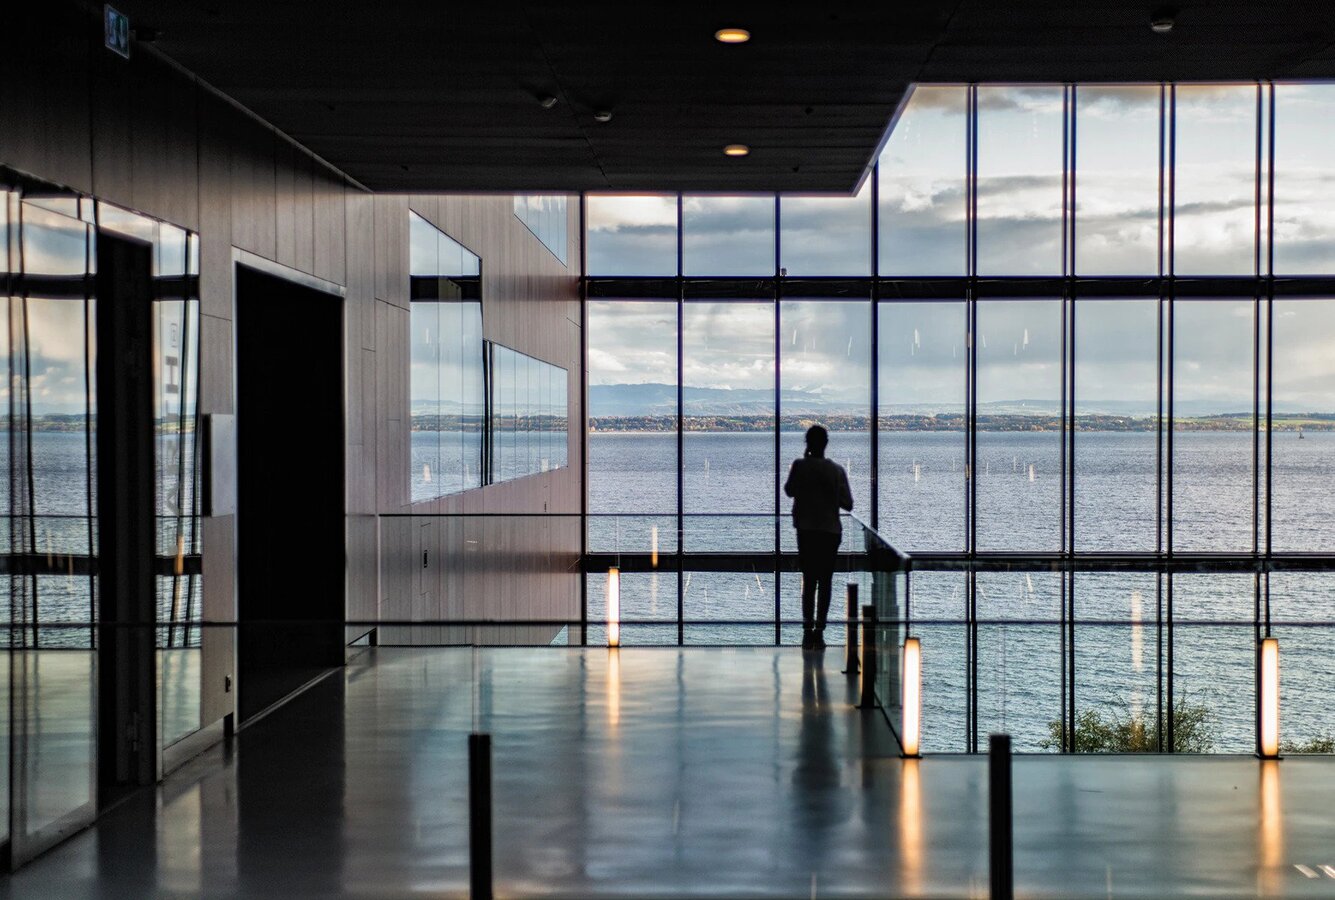 A view from inside The Cube, PMI’s research and development facility in Neuchâtel, Switzerland.